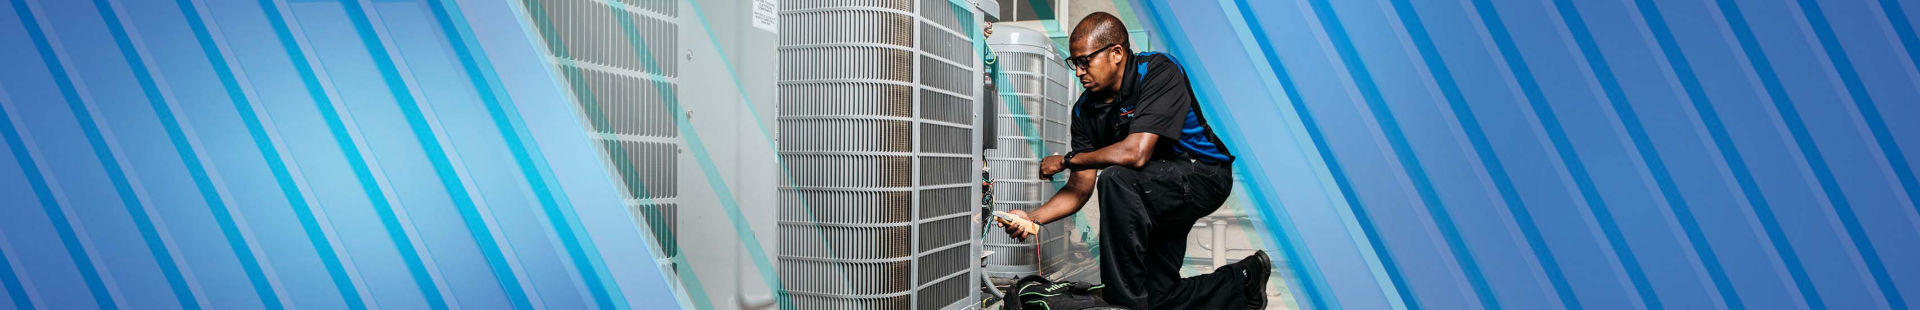 Coolray technician repairing an air conditioner